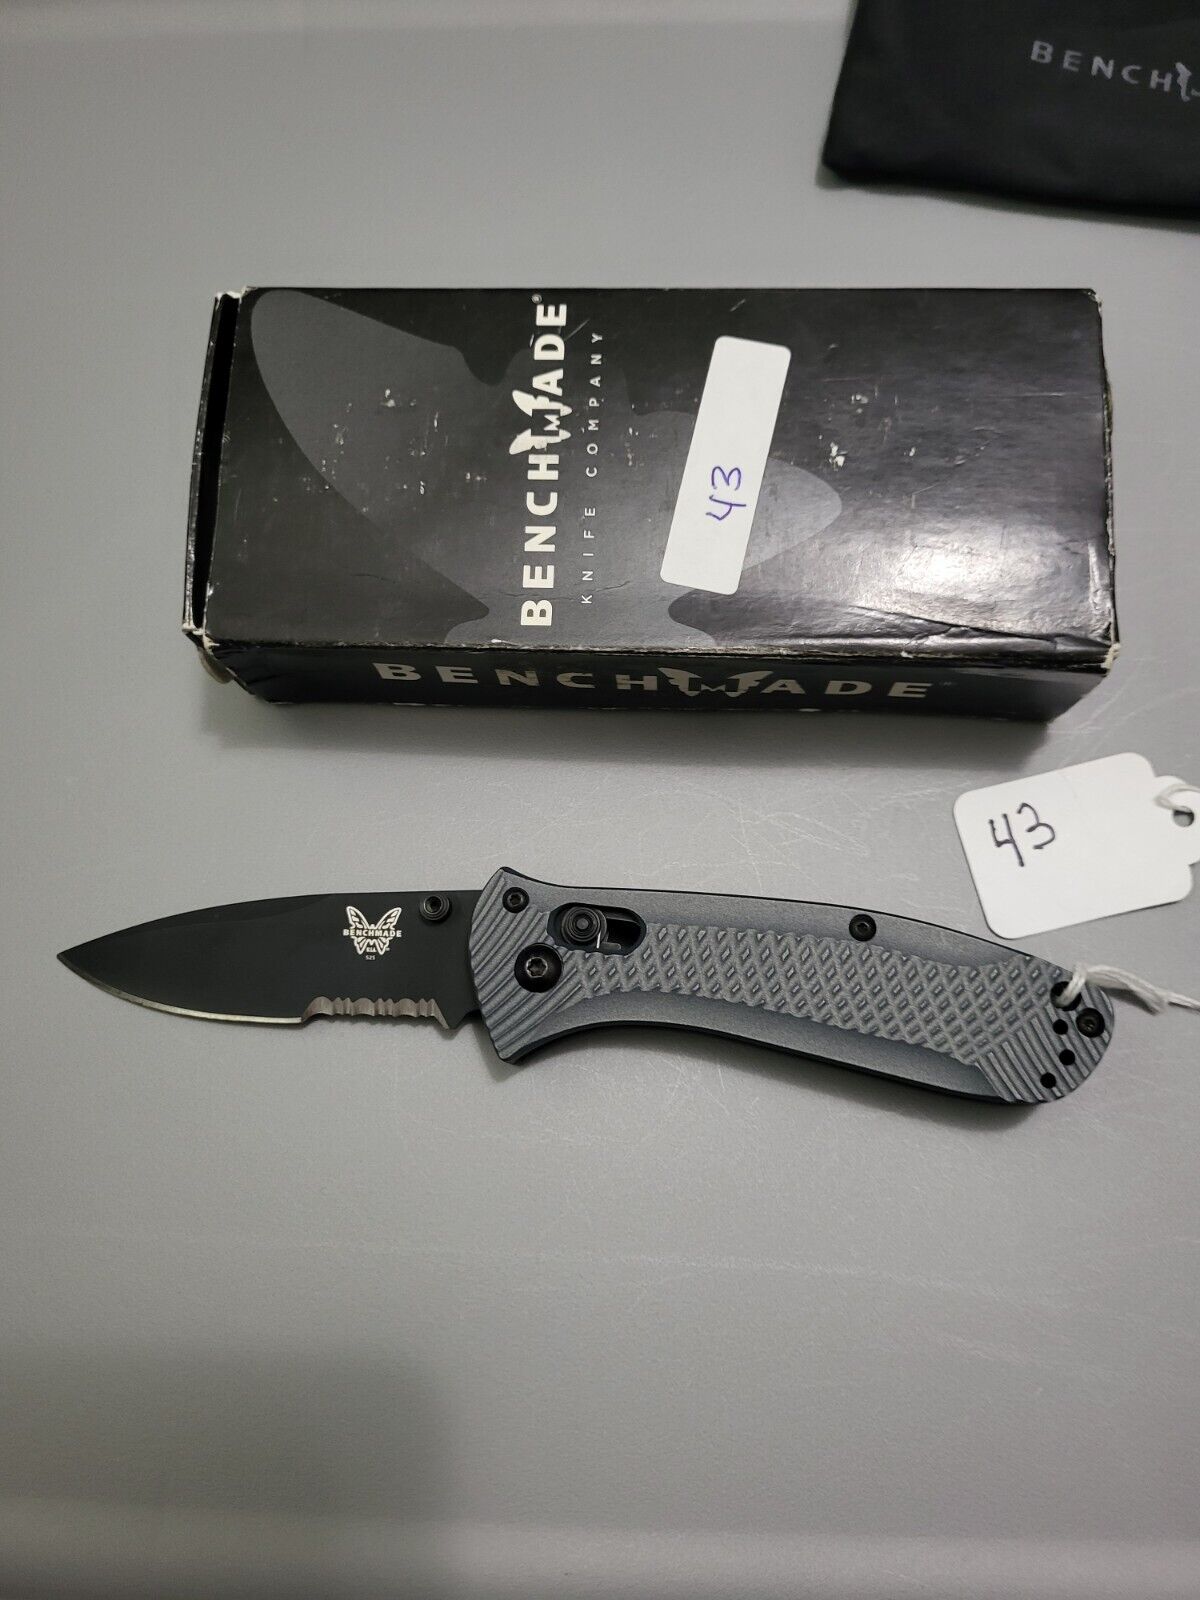 benchmade mel pardue 154cm Limeted Edition 258 of 400 collector